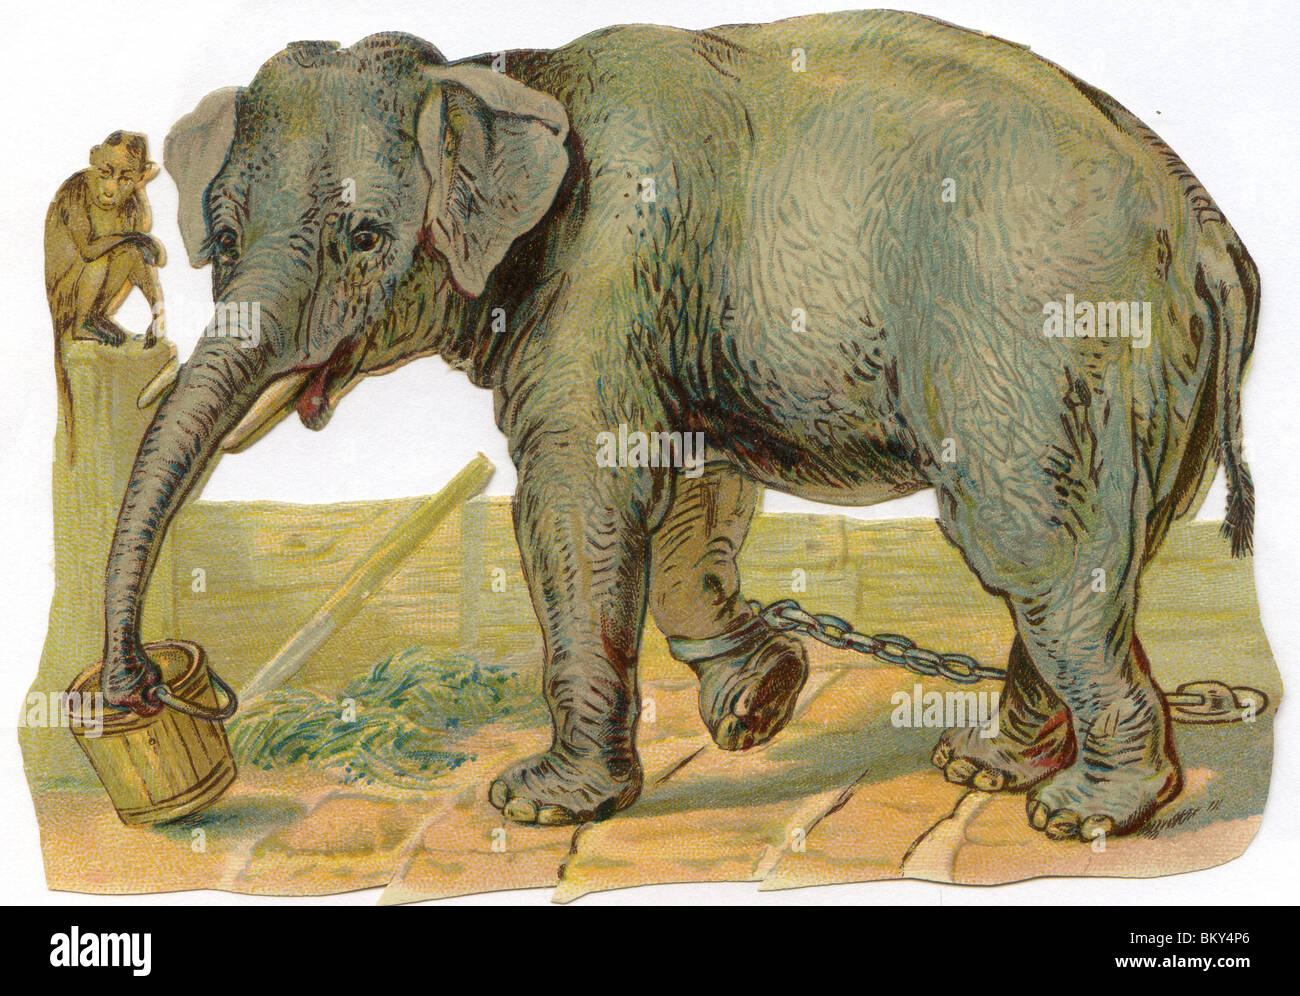 Elephant Chained up Having a Drink with Monkey looking on Stock Photo